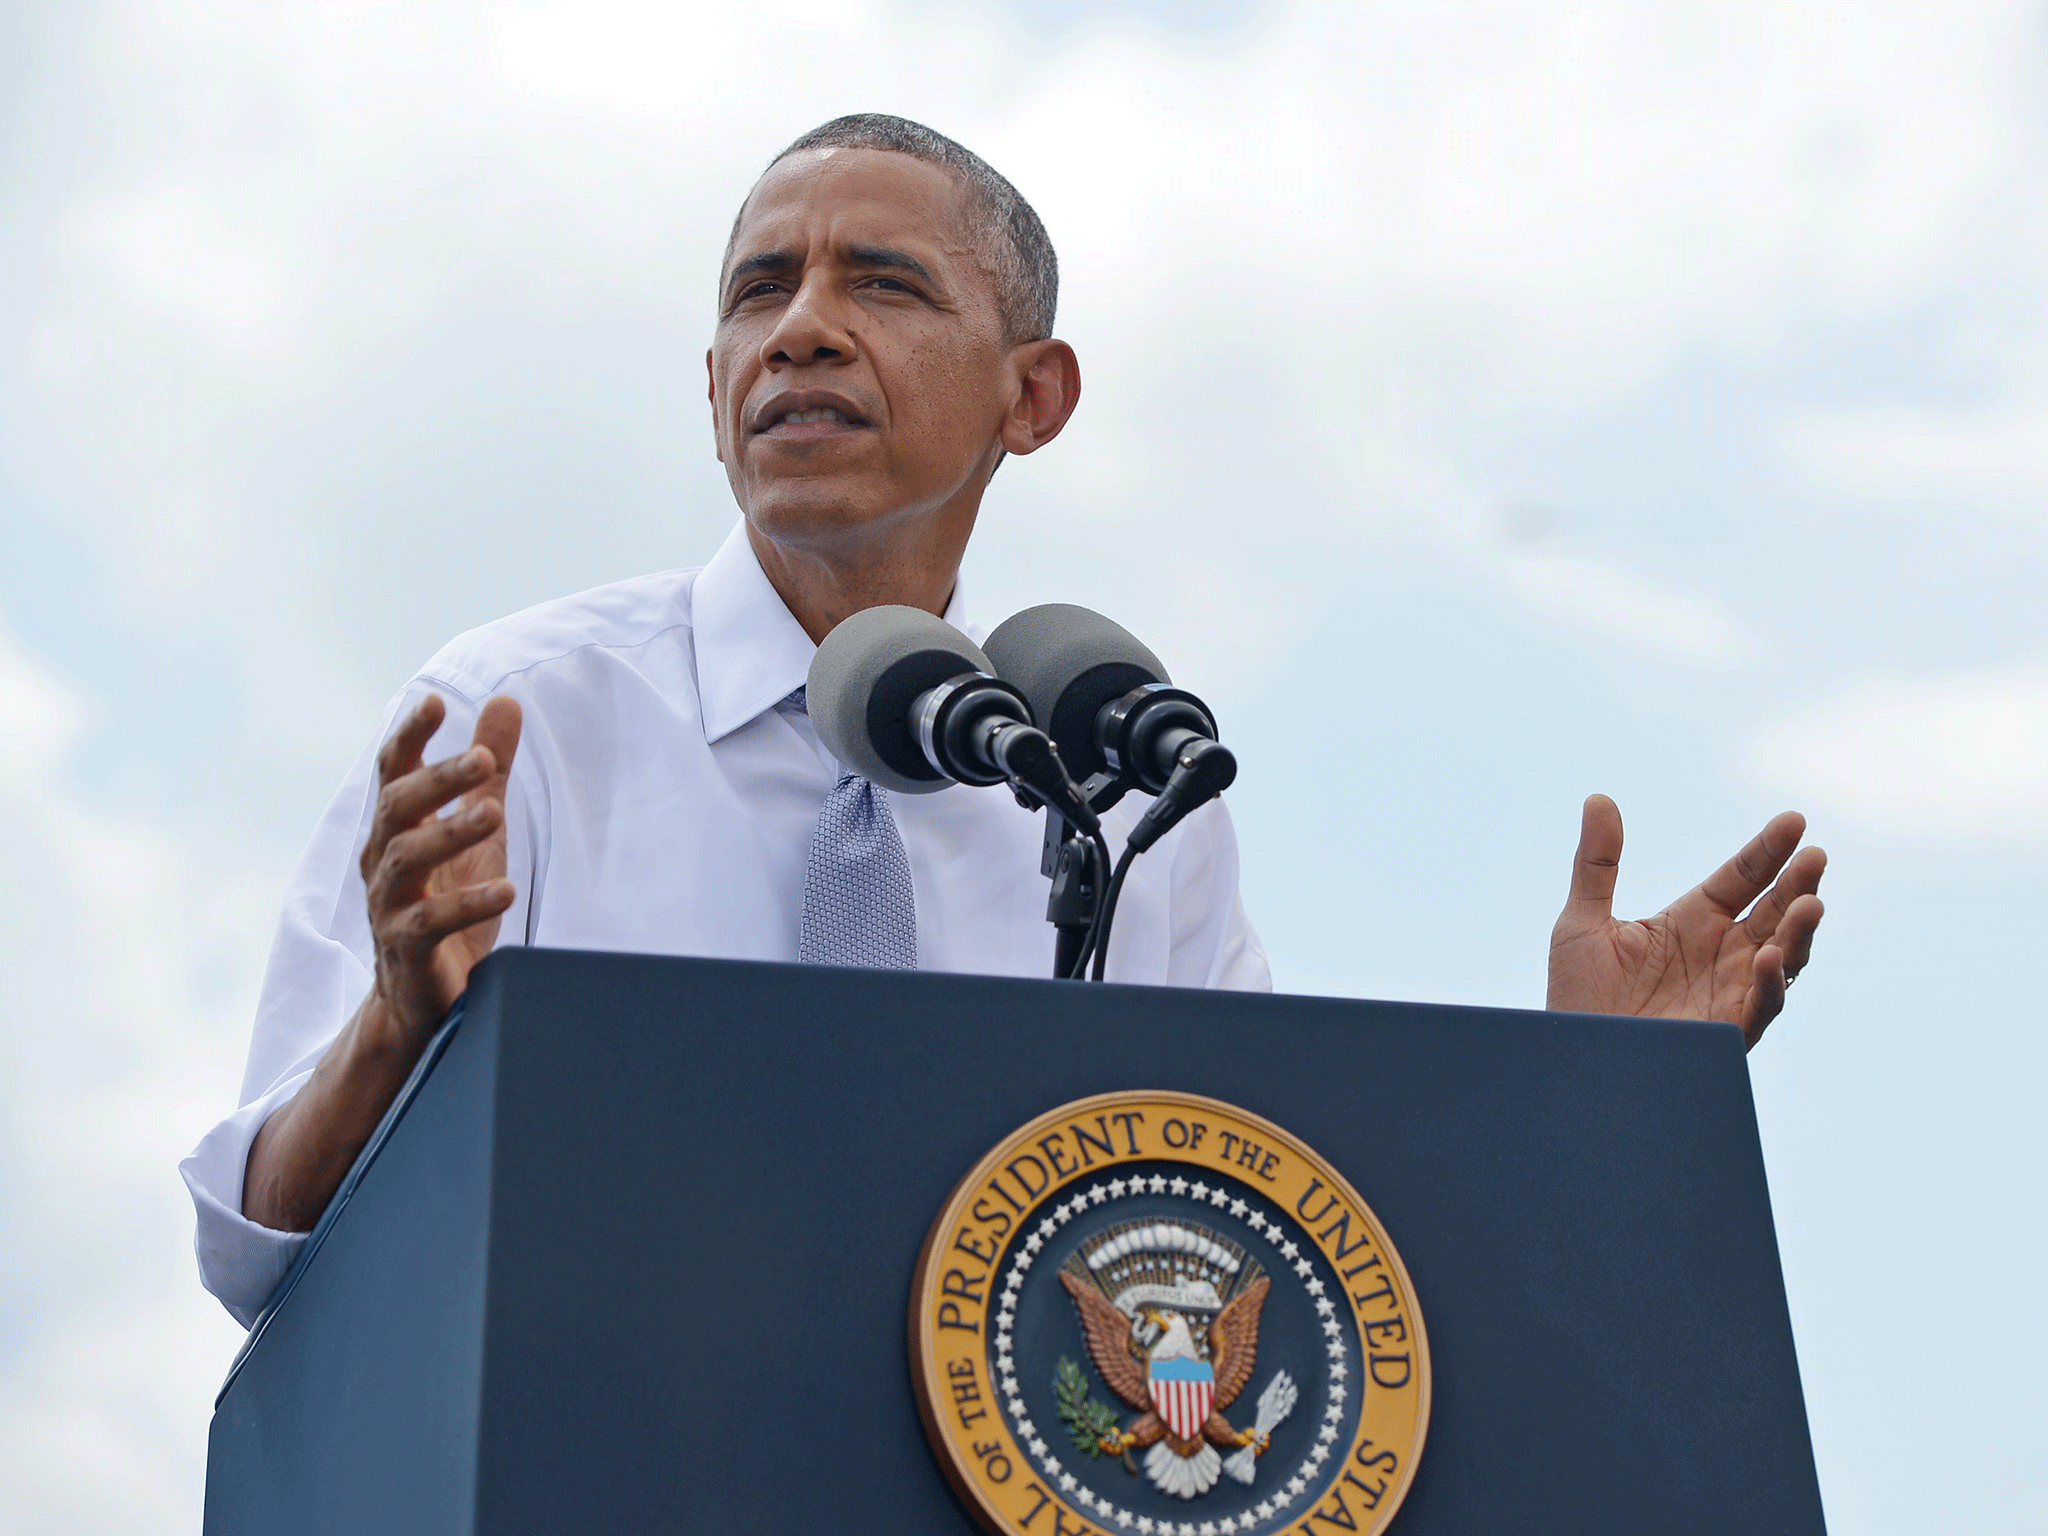 US President Barack Obama speaks on the economy in Georgetown Waterfront Park on July 1, 2014 in Washington